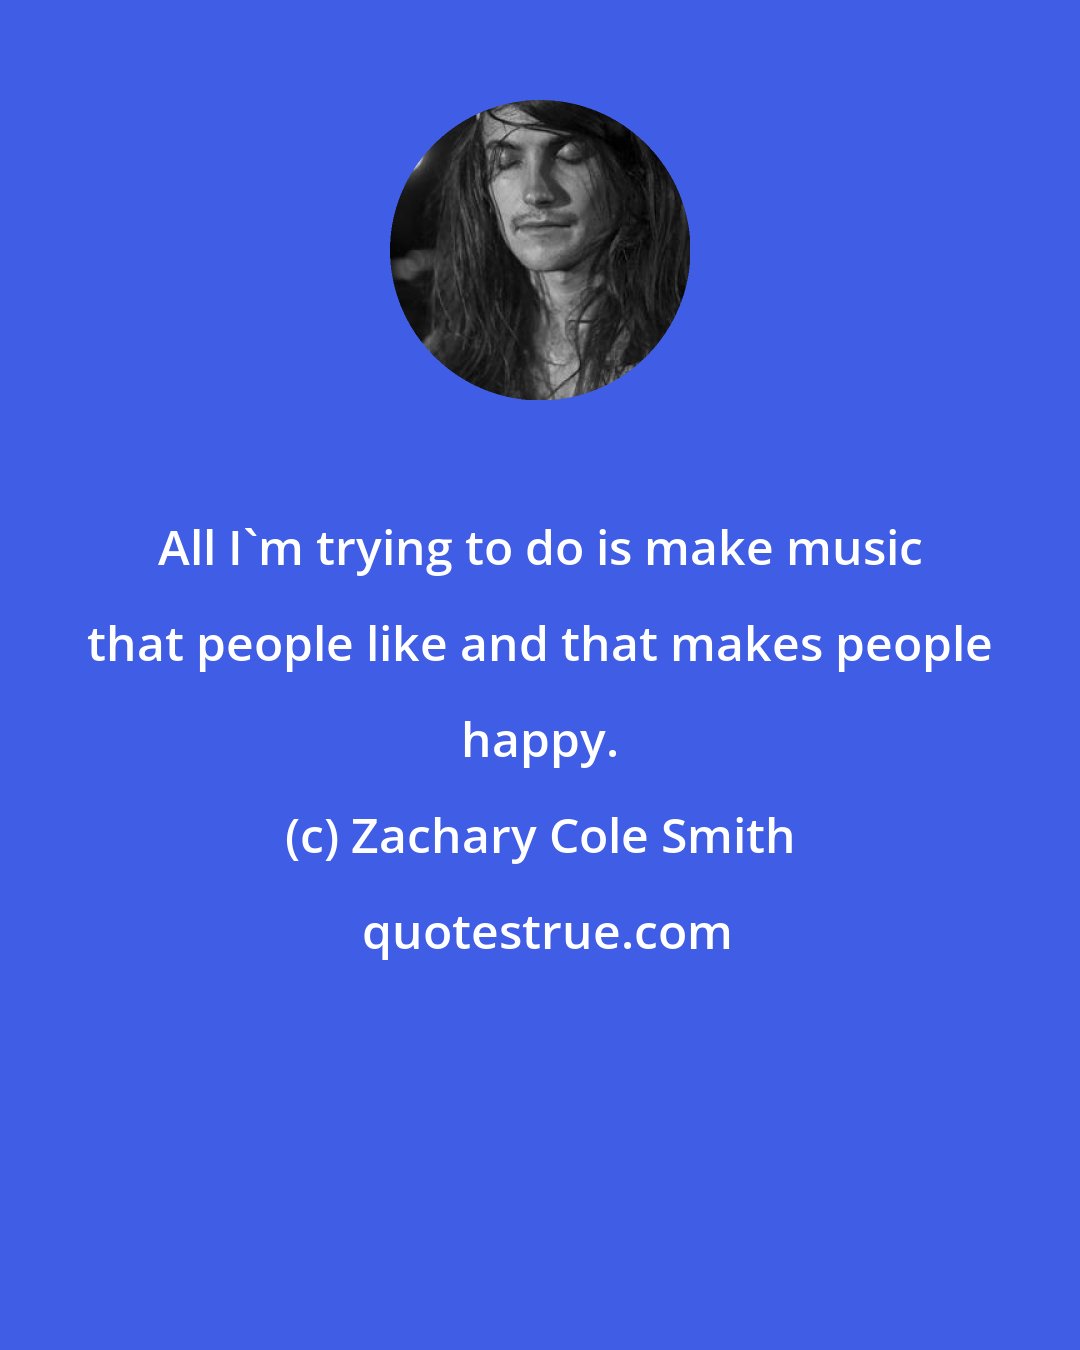 Zachary Cole Smith: All I'm trying to do is make music that people like and that makes people happy.